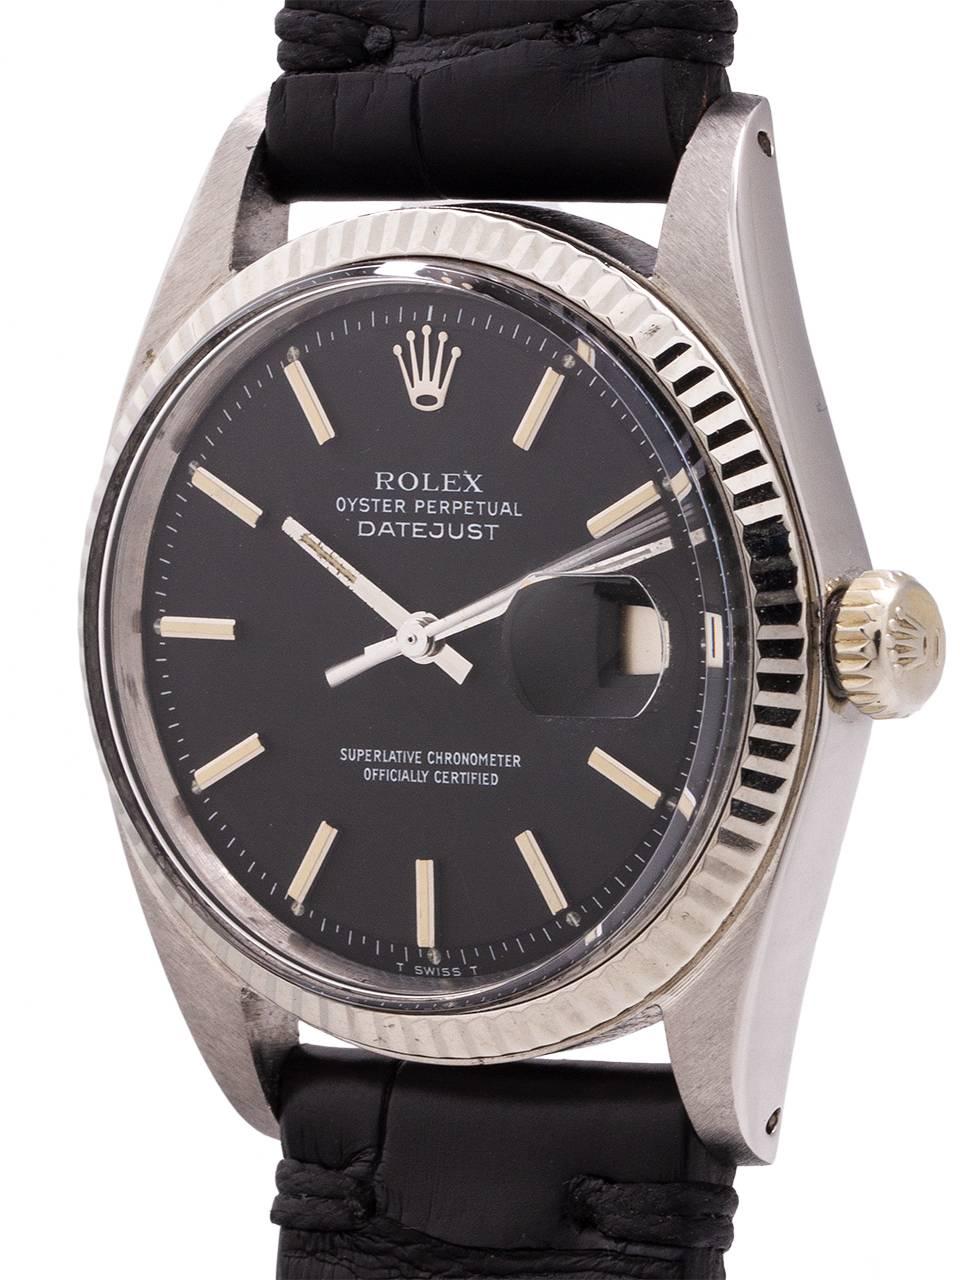 
Vintage Rolex Datejust ref 1601 serial # 1.8 million circa 1965 with scarce original matte black pie pan dial. Featuring 36mm diameter Oyster case with 14K white gold fluted bezel, acrylic crystal, and beautiful condition original matte black pie